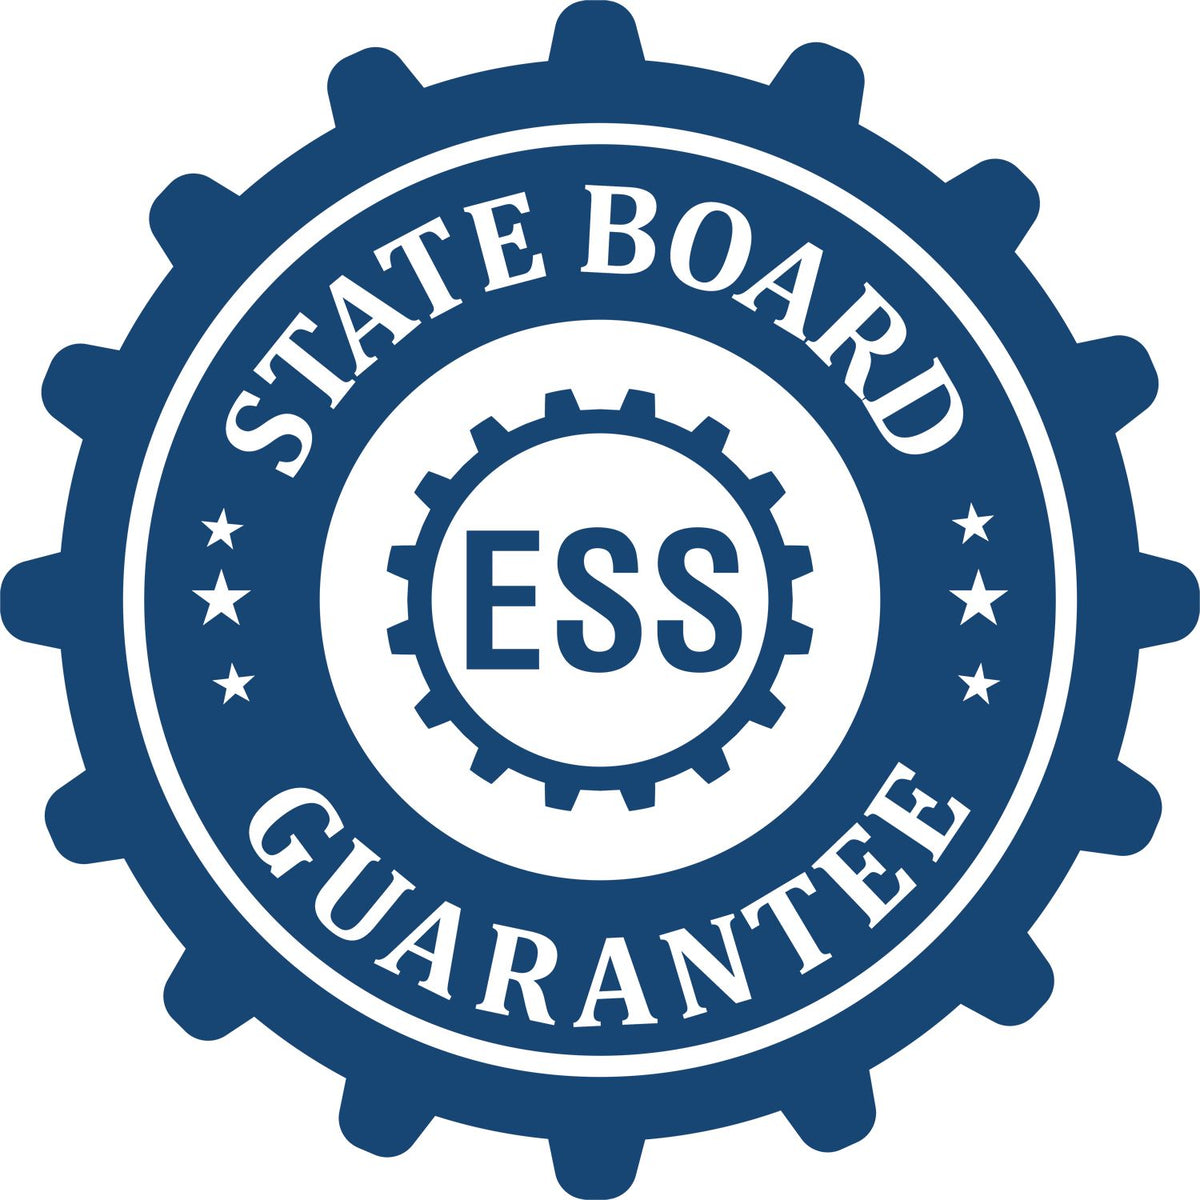 An emblem in a gear shape illustrating a state board guarantee for the Handheld Connecticut Land Surveyor Seal product.